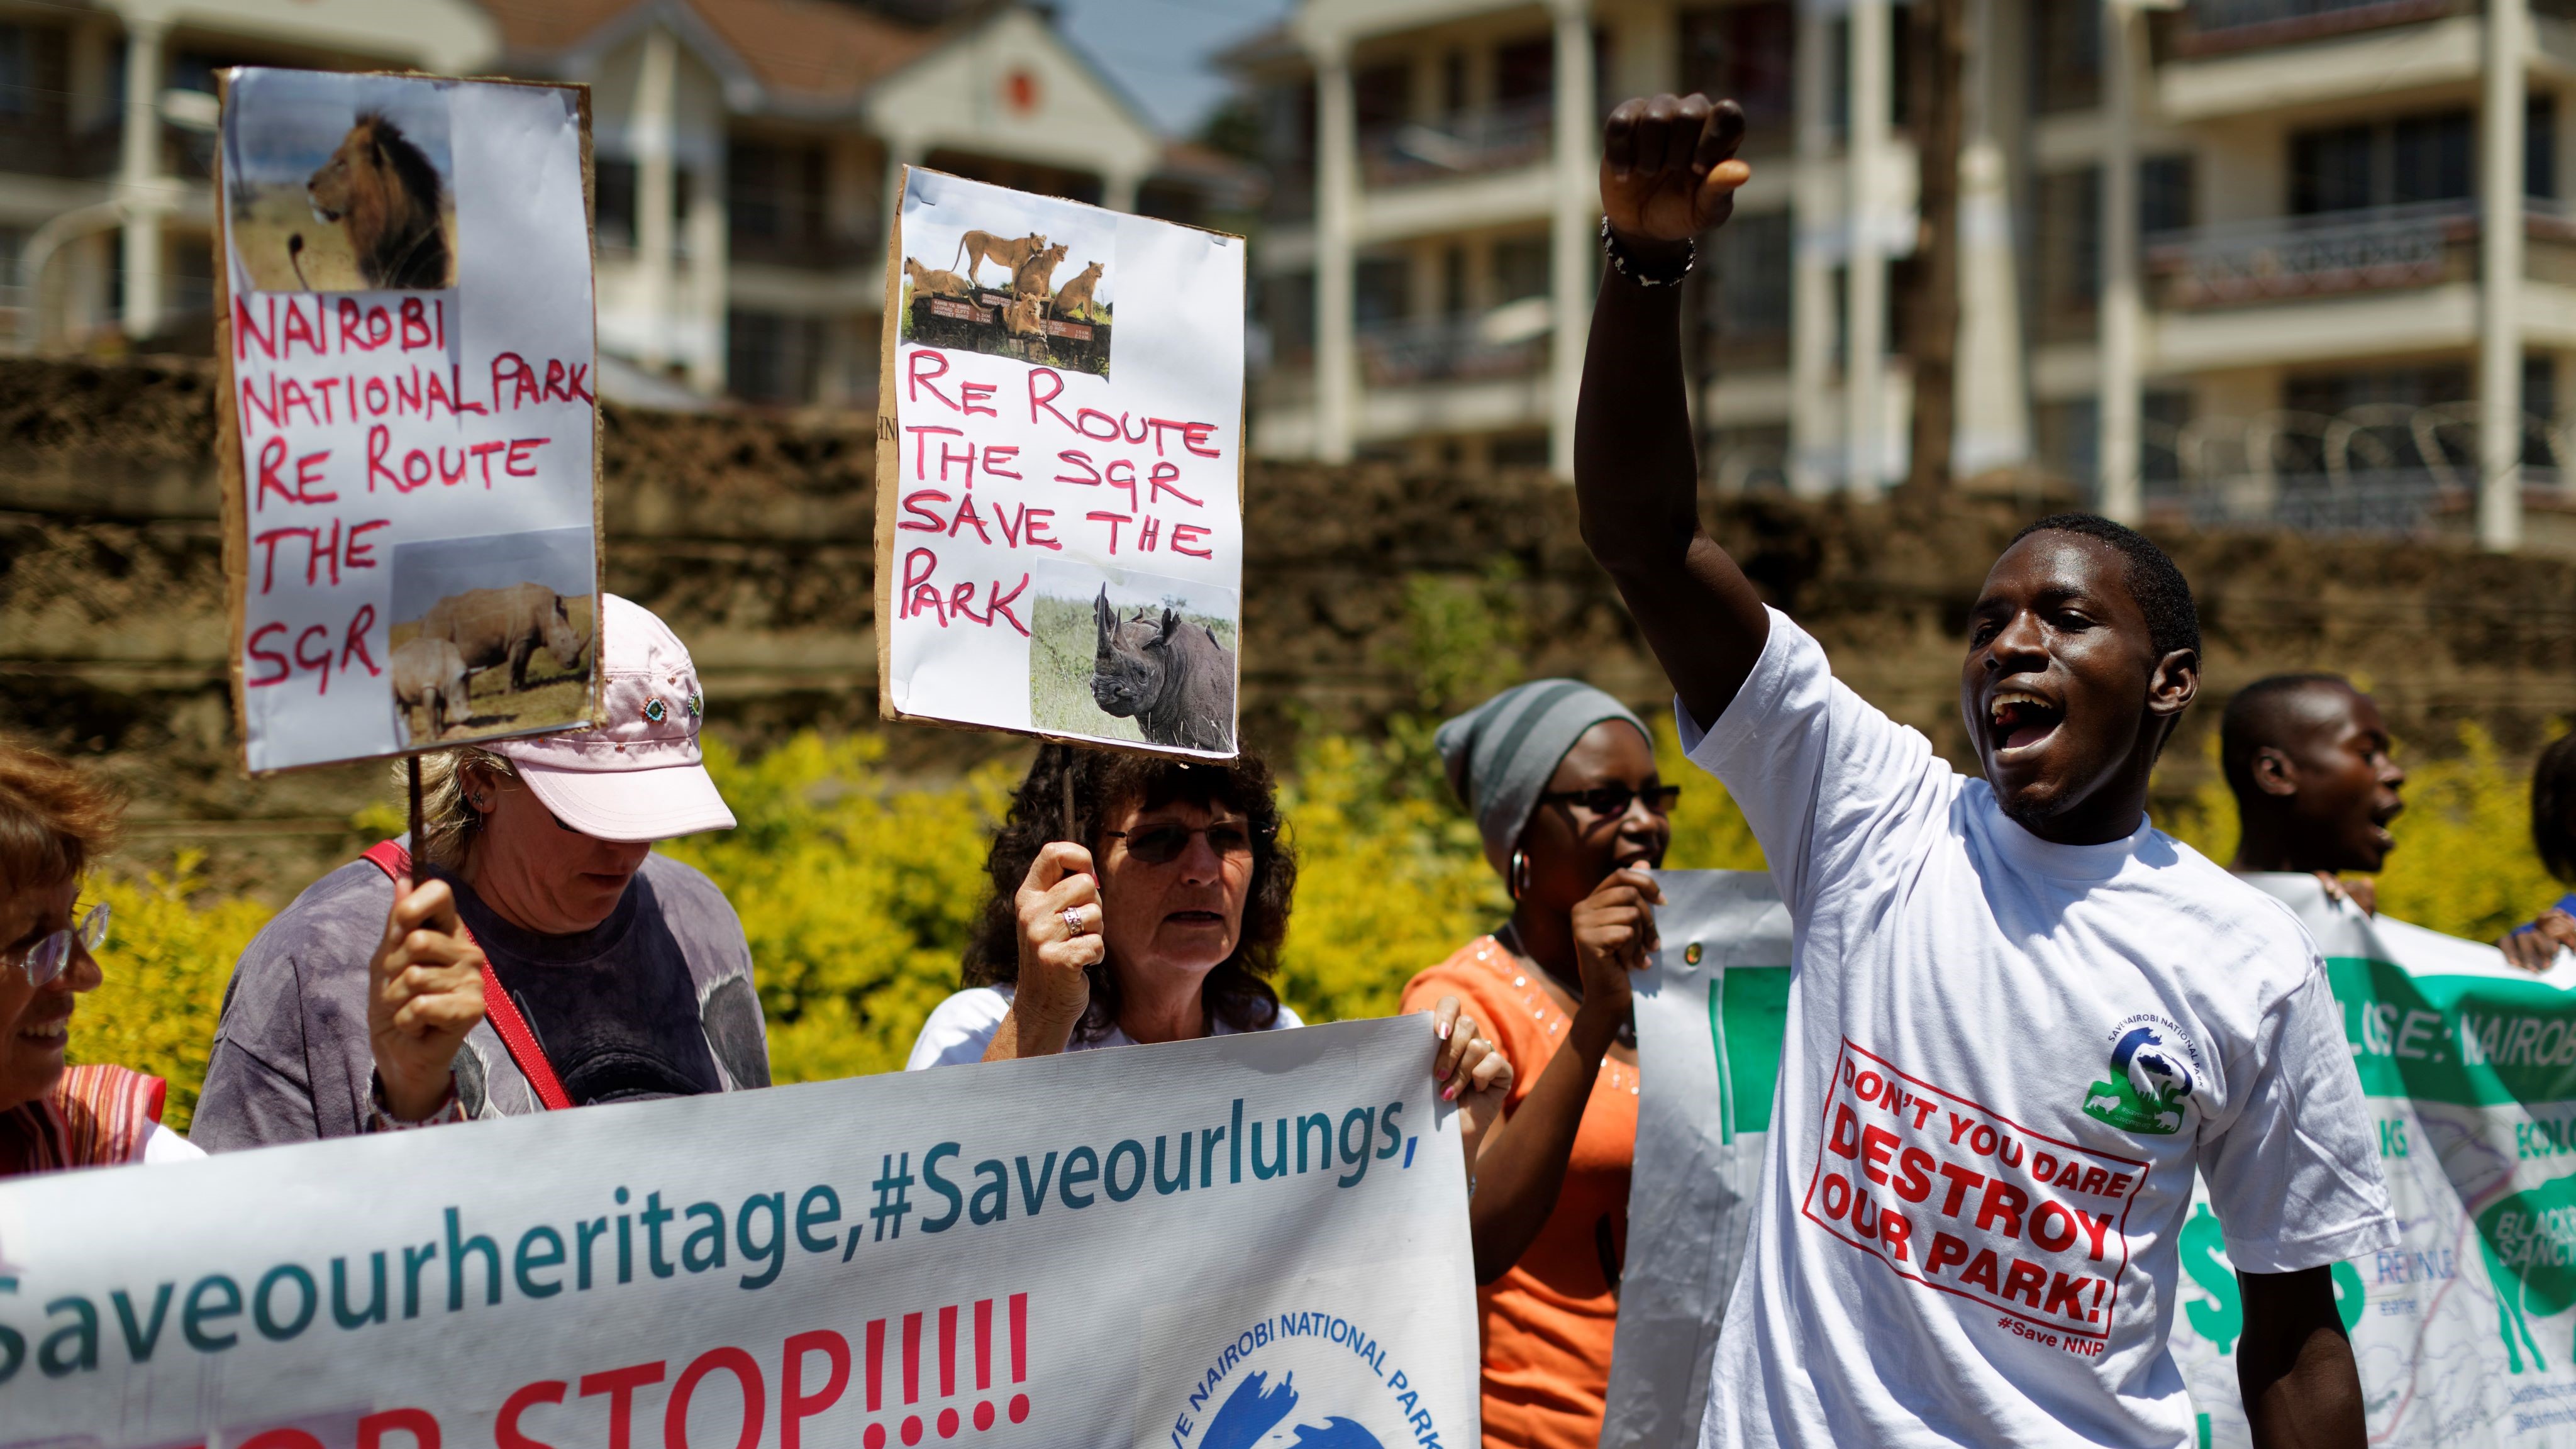 Environmental and wildlife campaigners march to the Chinese embassy to protest the proposed construction of a Chinese-built railway bridge, in Nairobi, Kenya, Oct. 17, 2016.